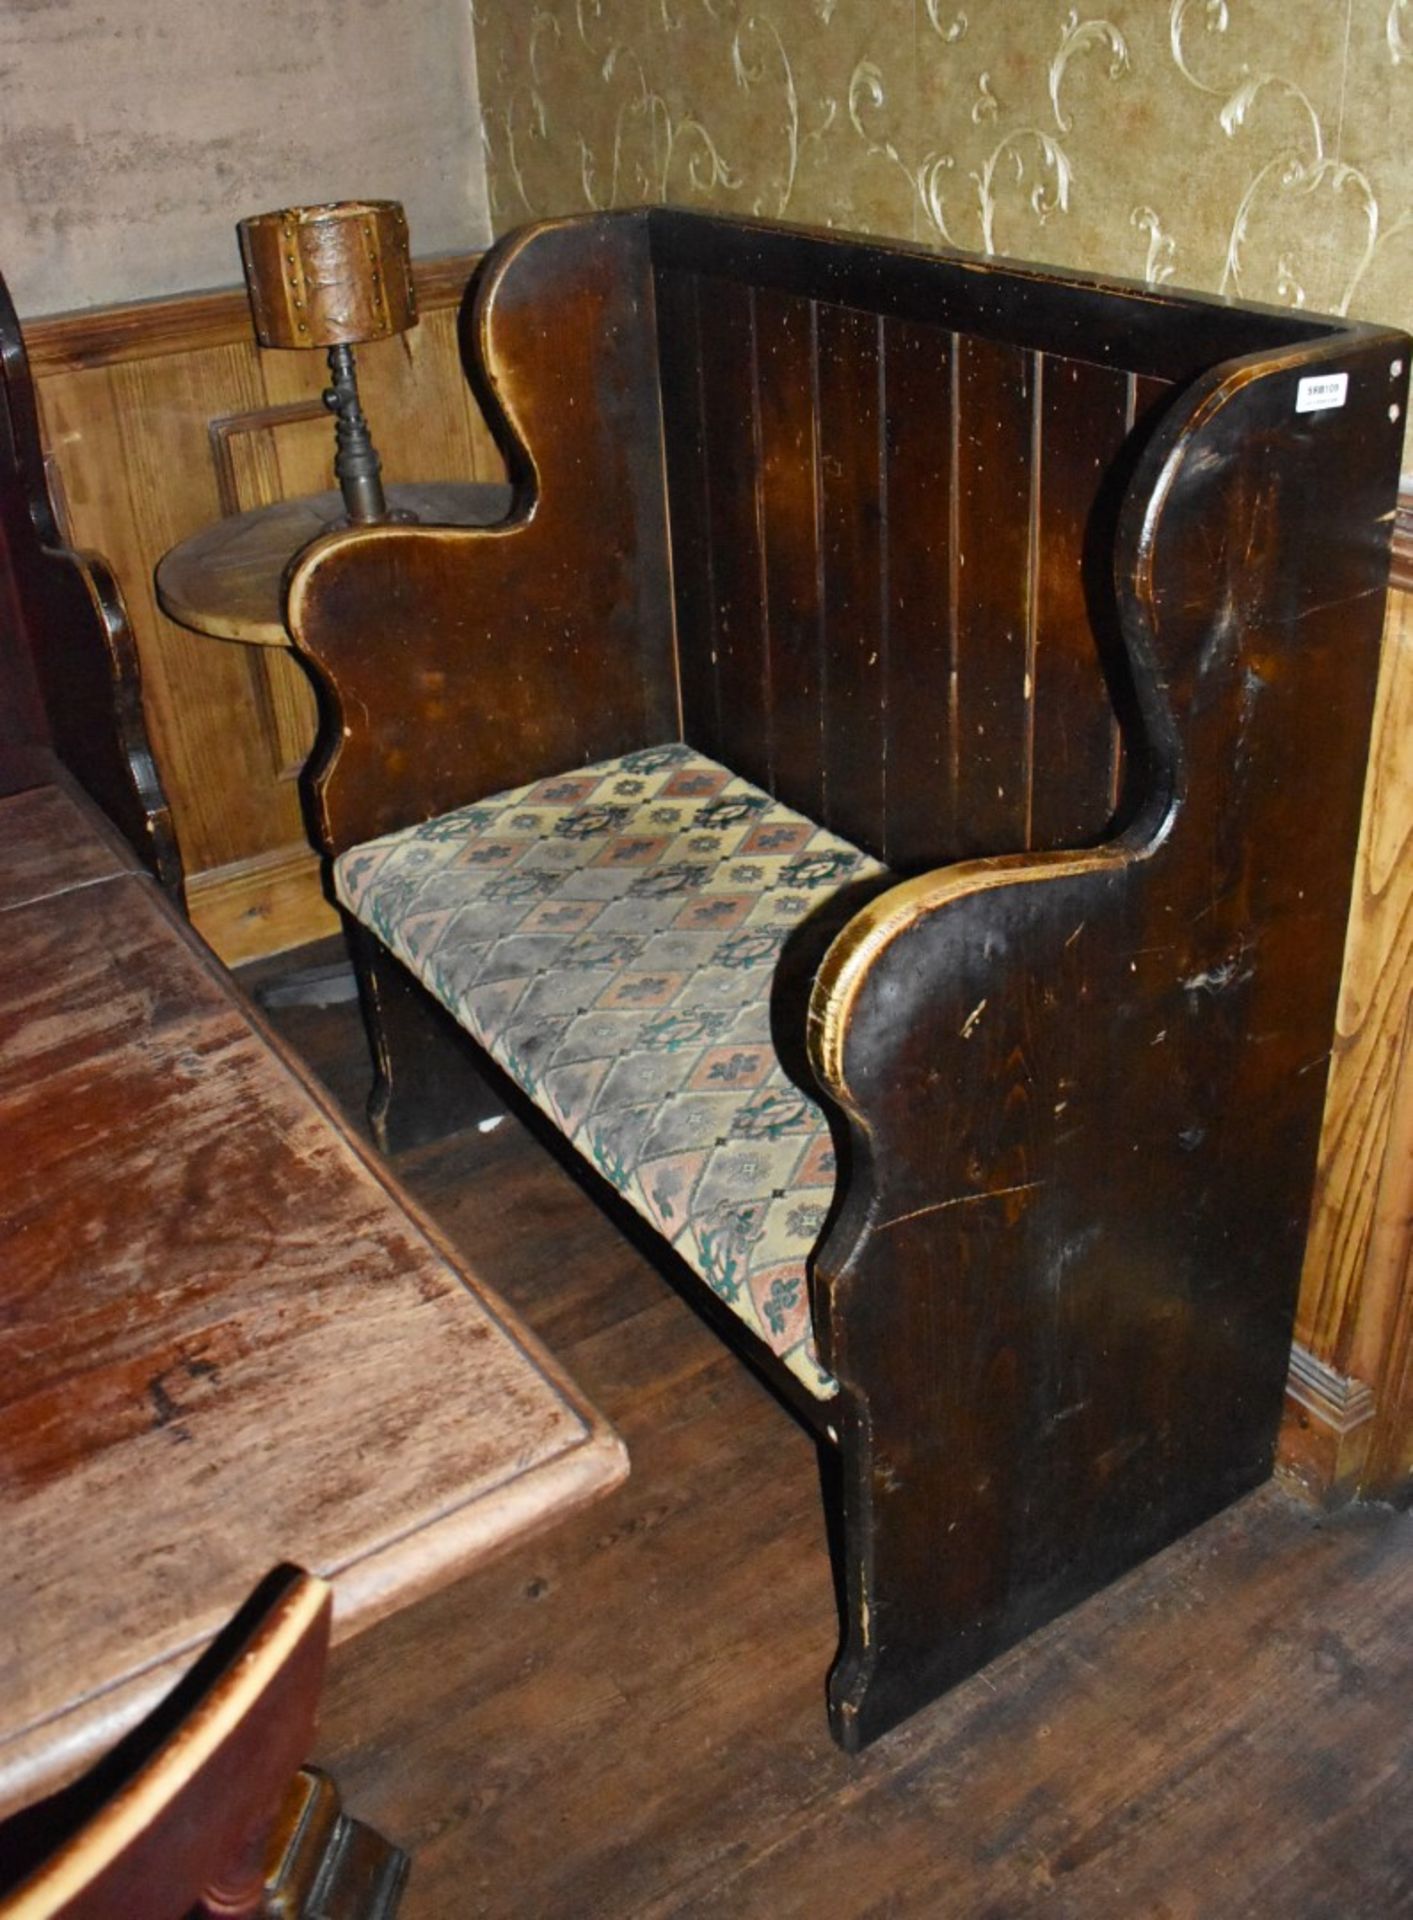 2 x Small Church Pew Seating Benches and Table With Lamp - Monks Bench - CL586 - Location: Stockport - Image 3 of 4